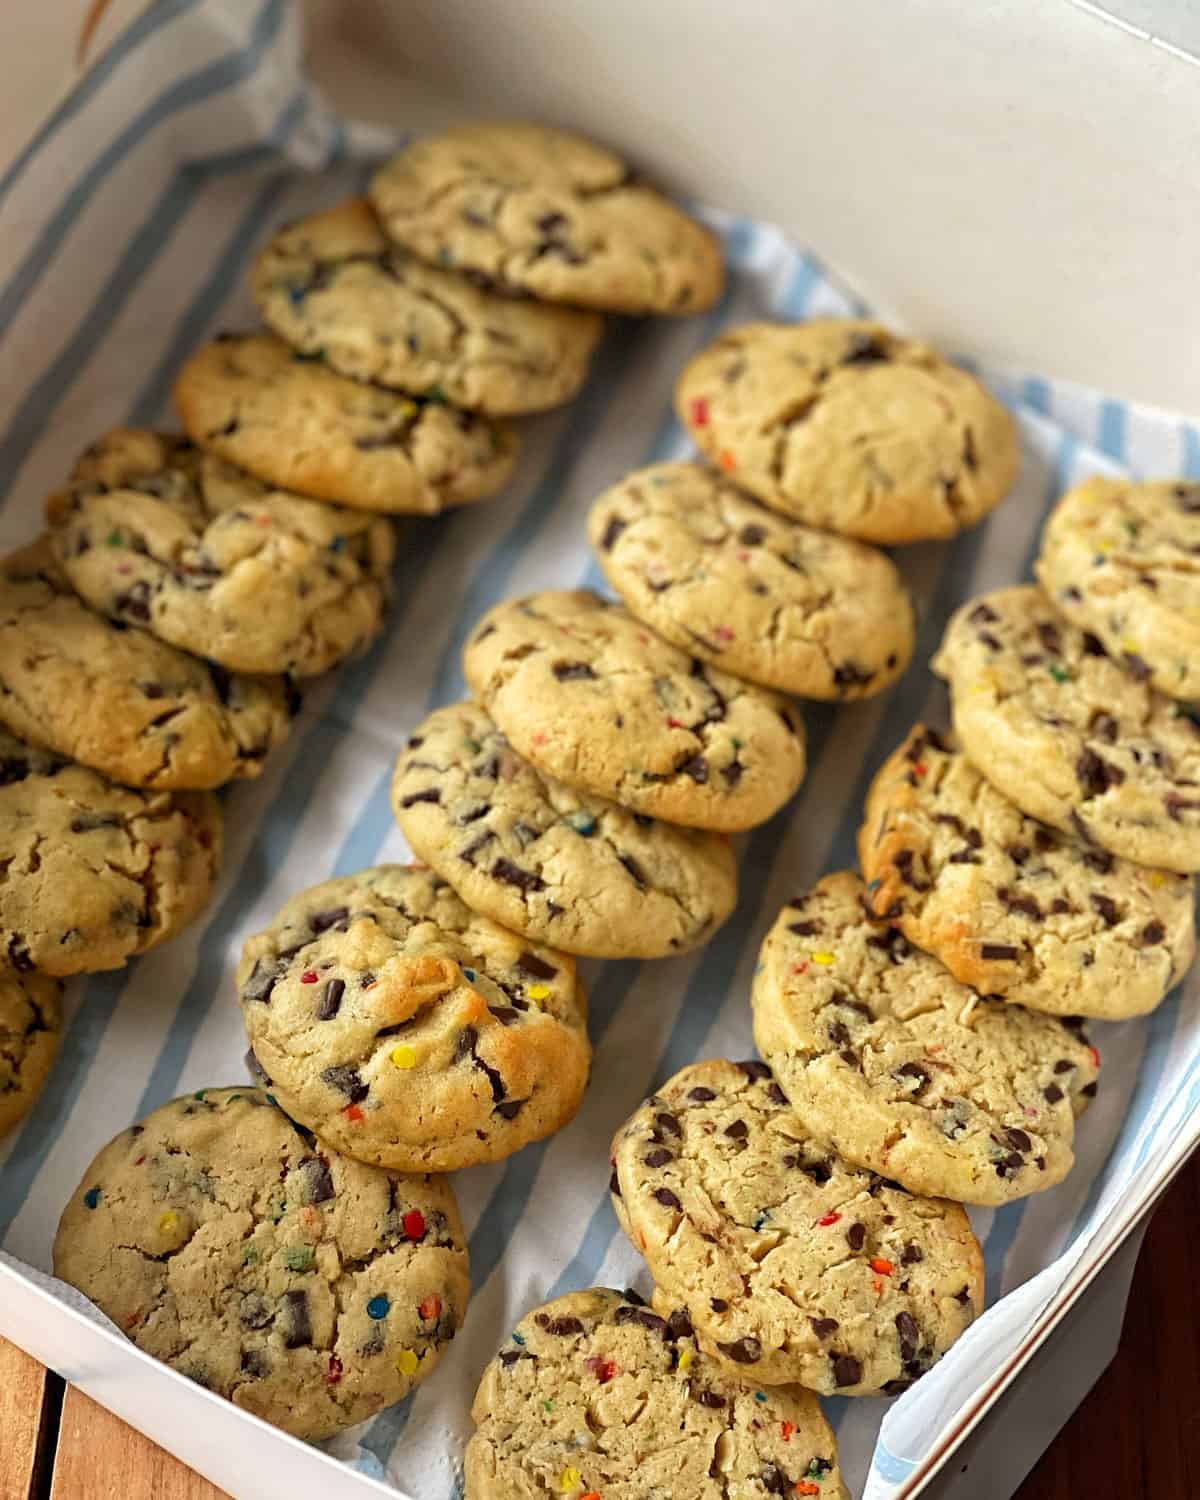 Oaty choc chip cookies in a cardboard box